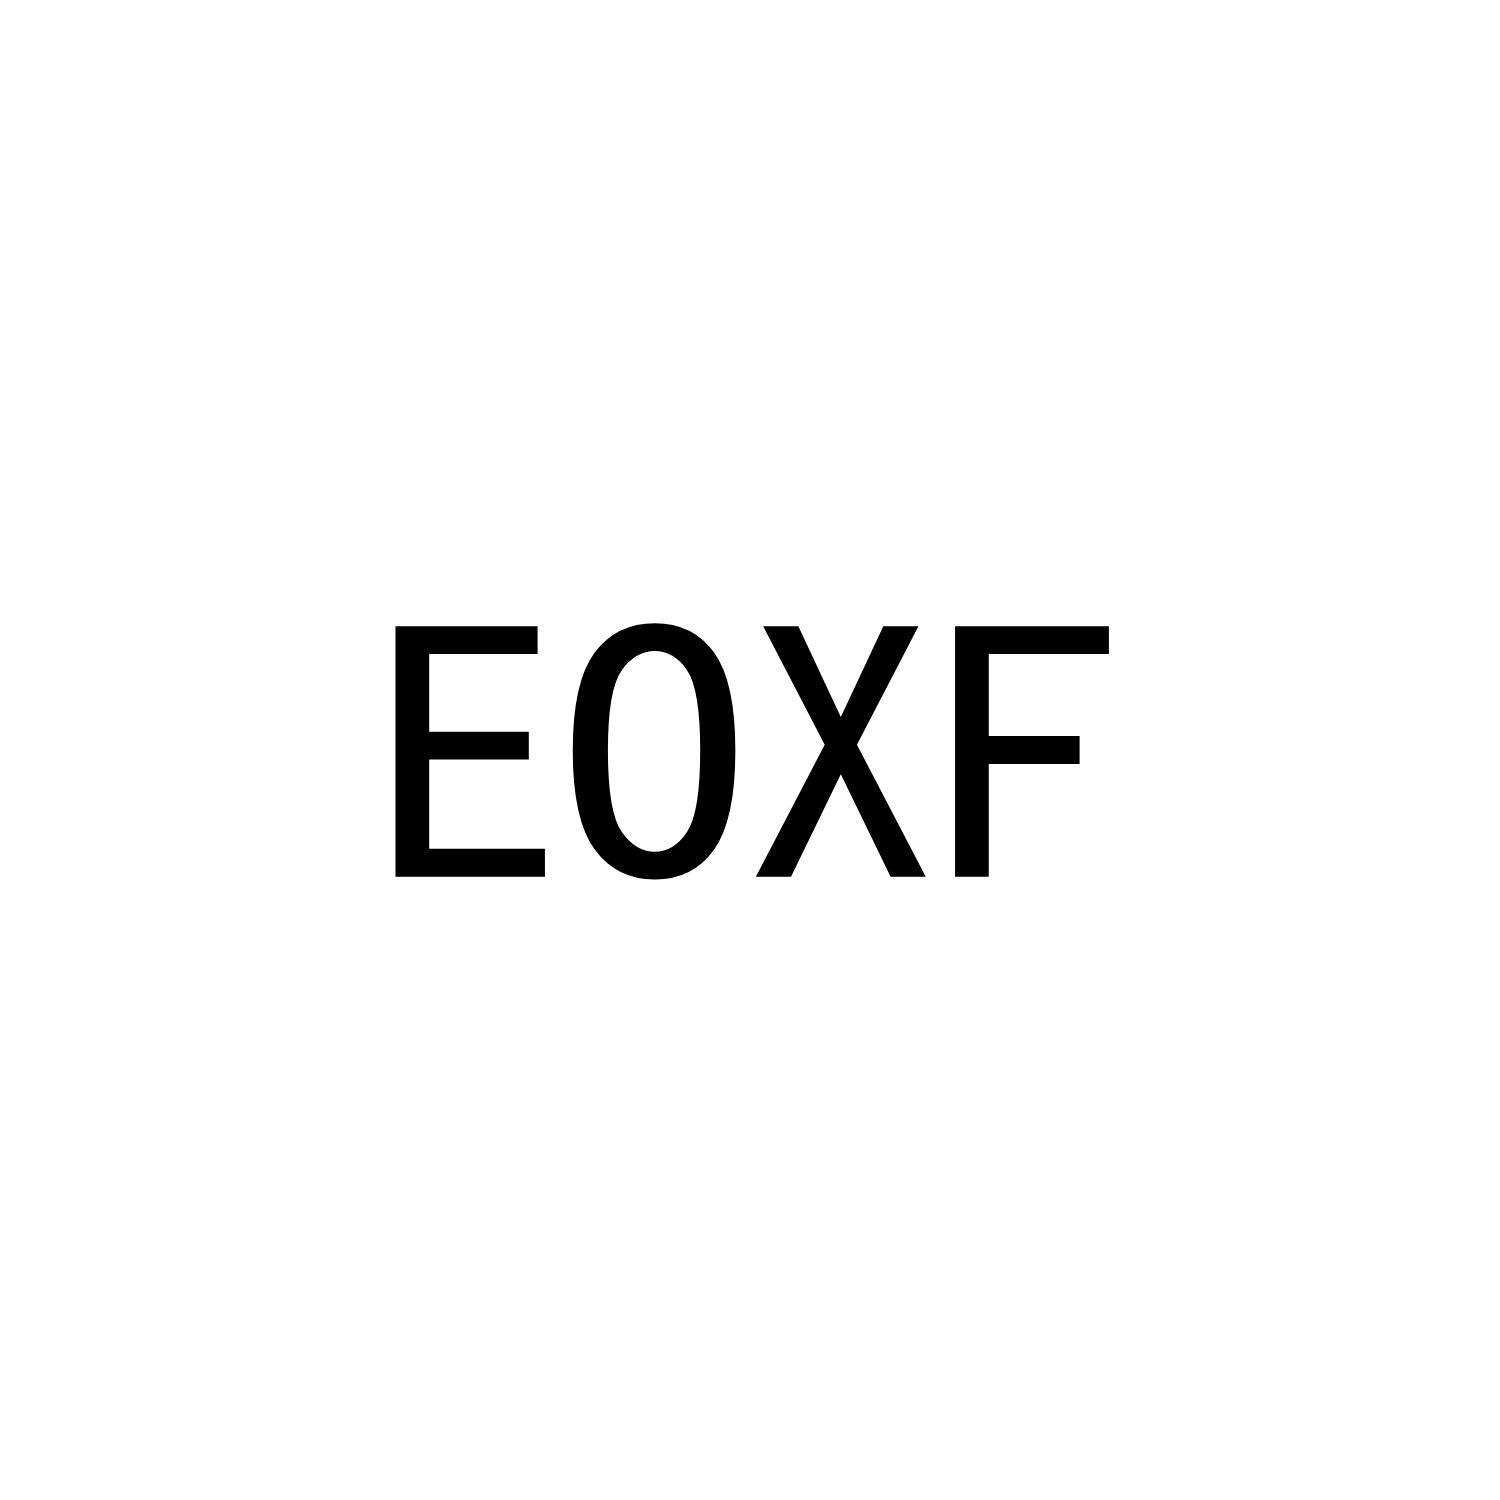 EOXF